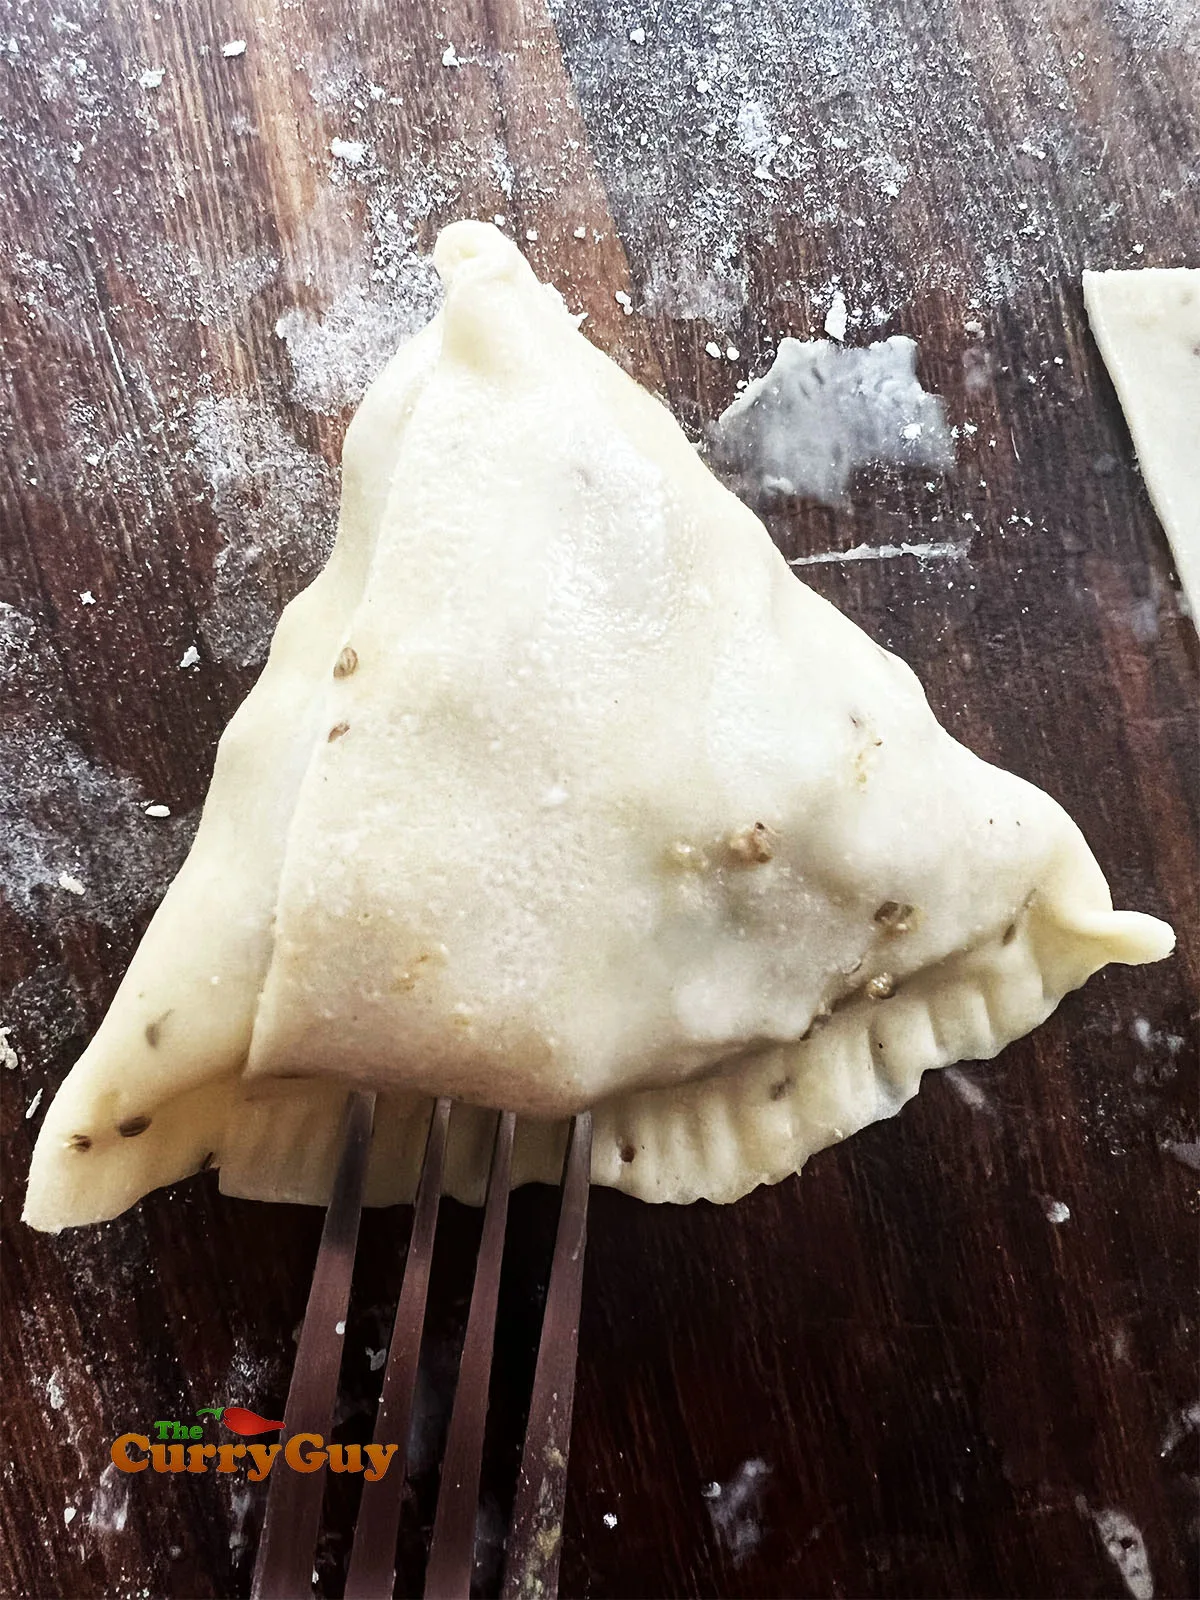 Securing the seam of the samosa